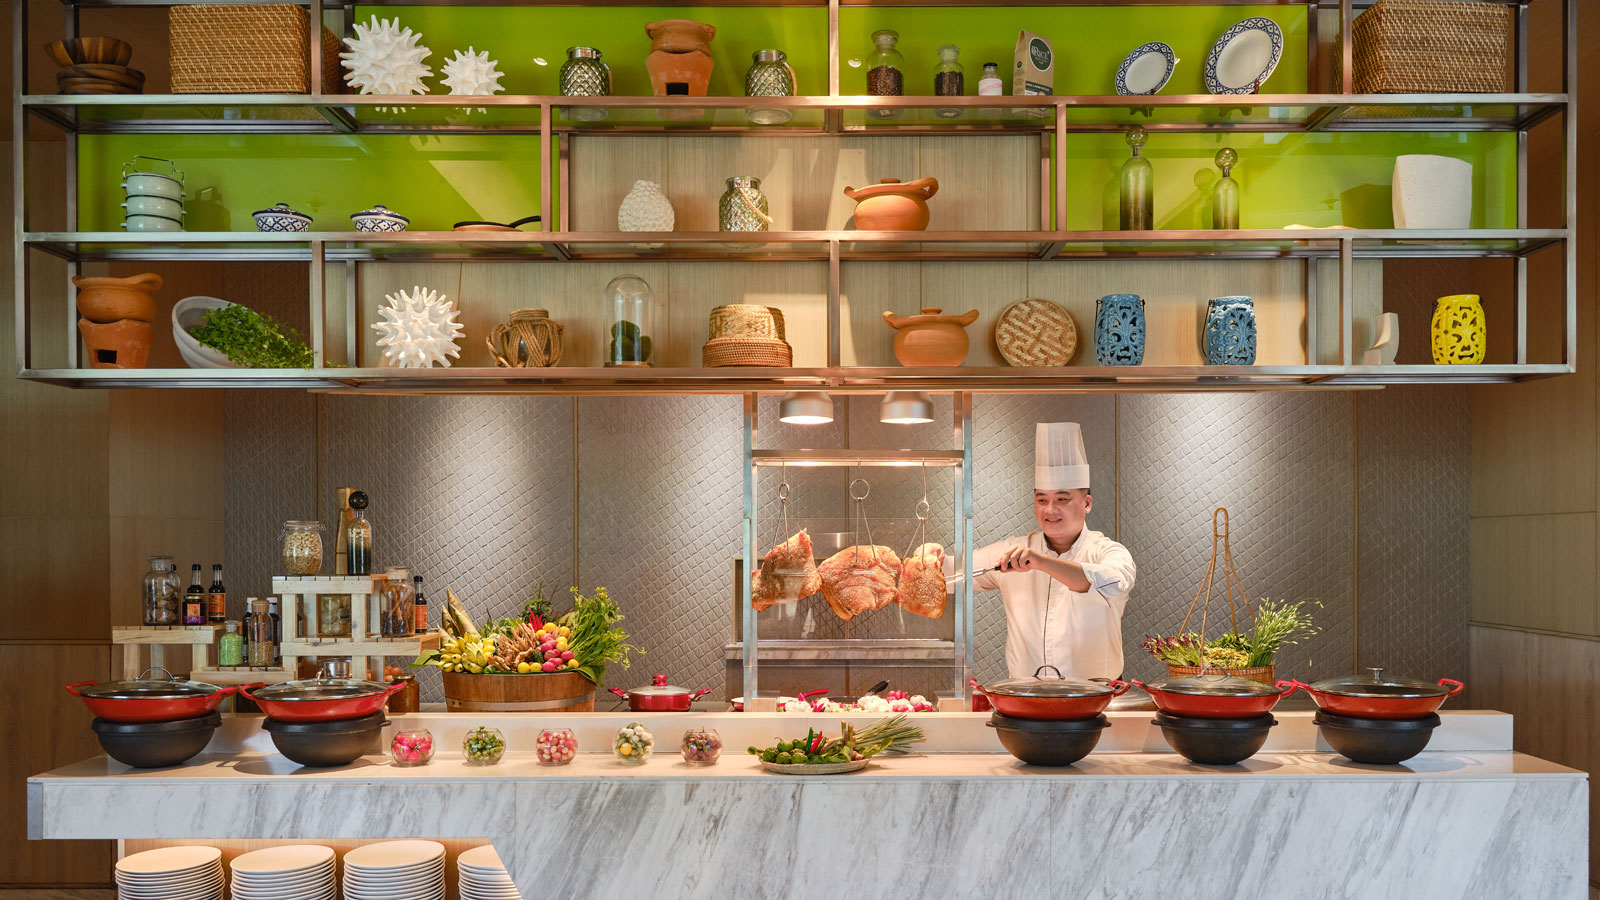 Live cooking stations at Amaya Food Gallery